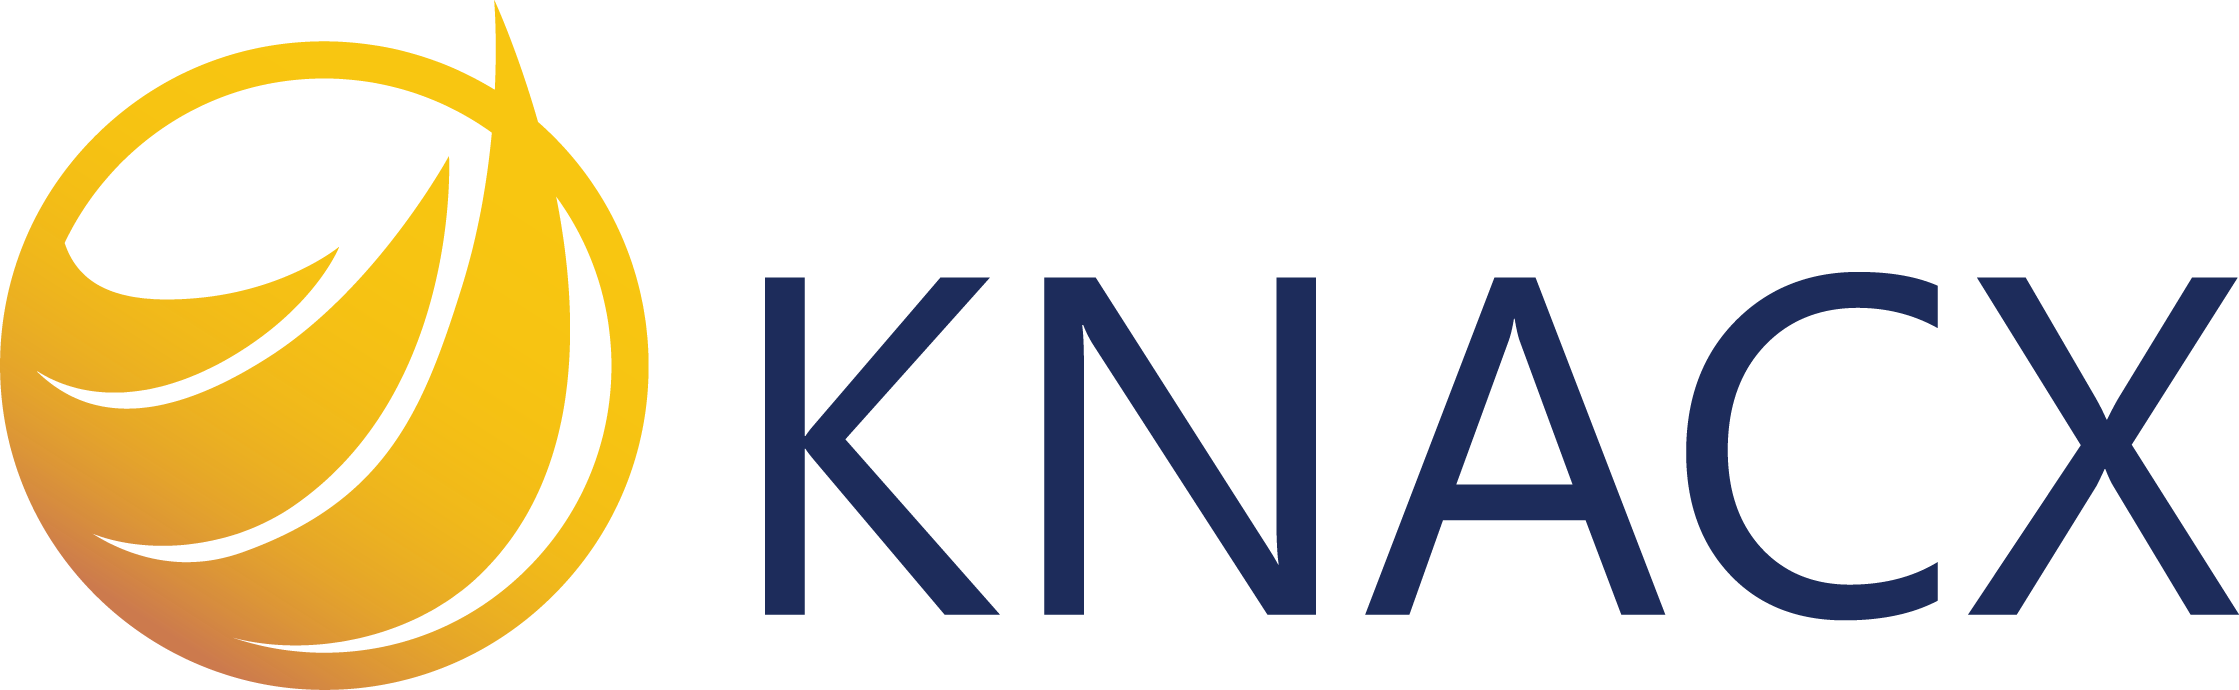 Knacx Corporation Limited